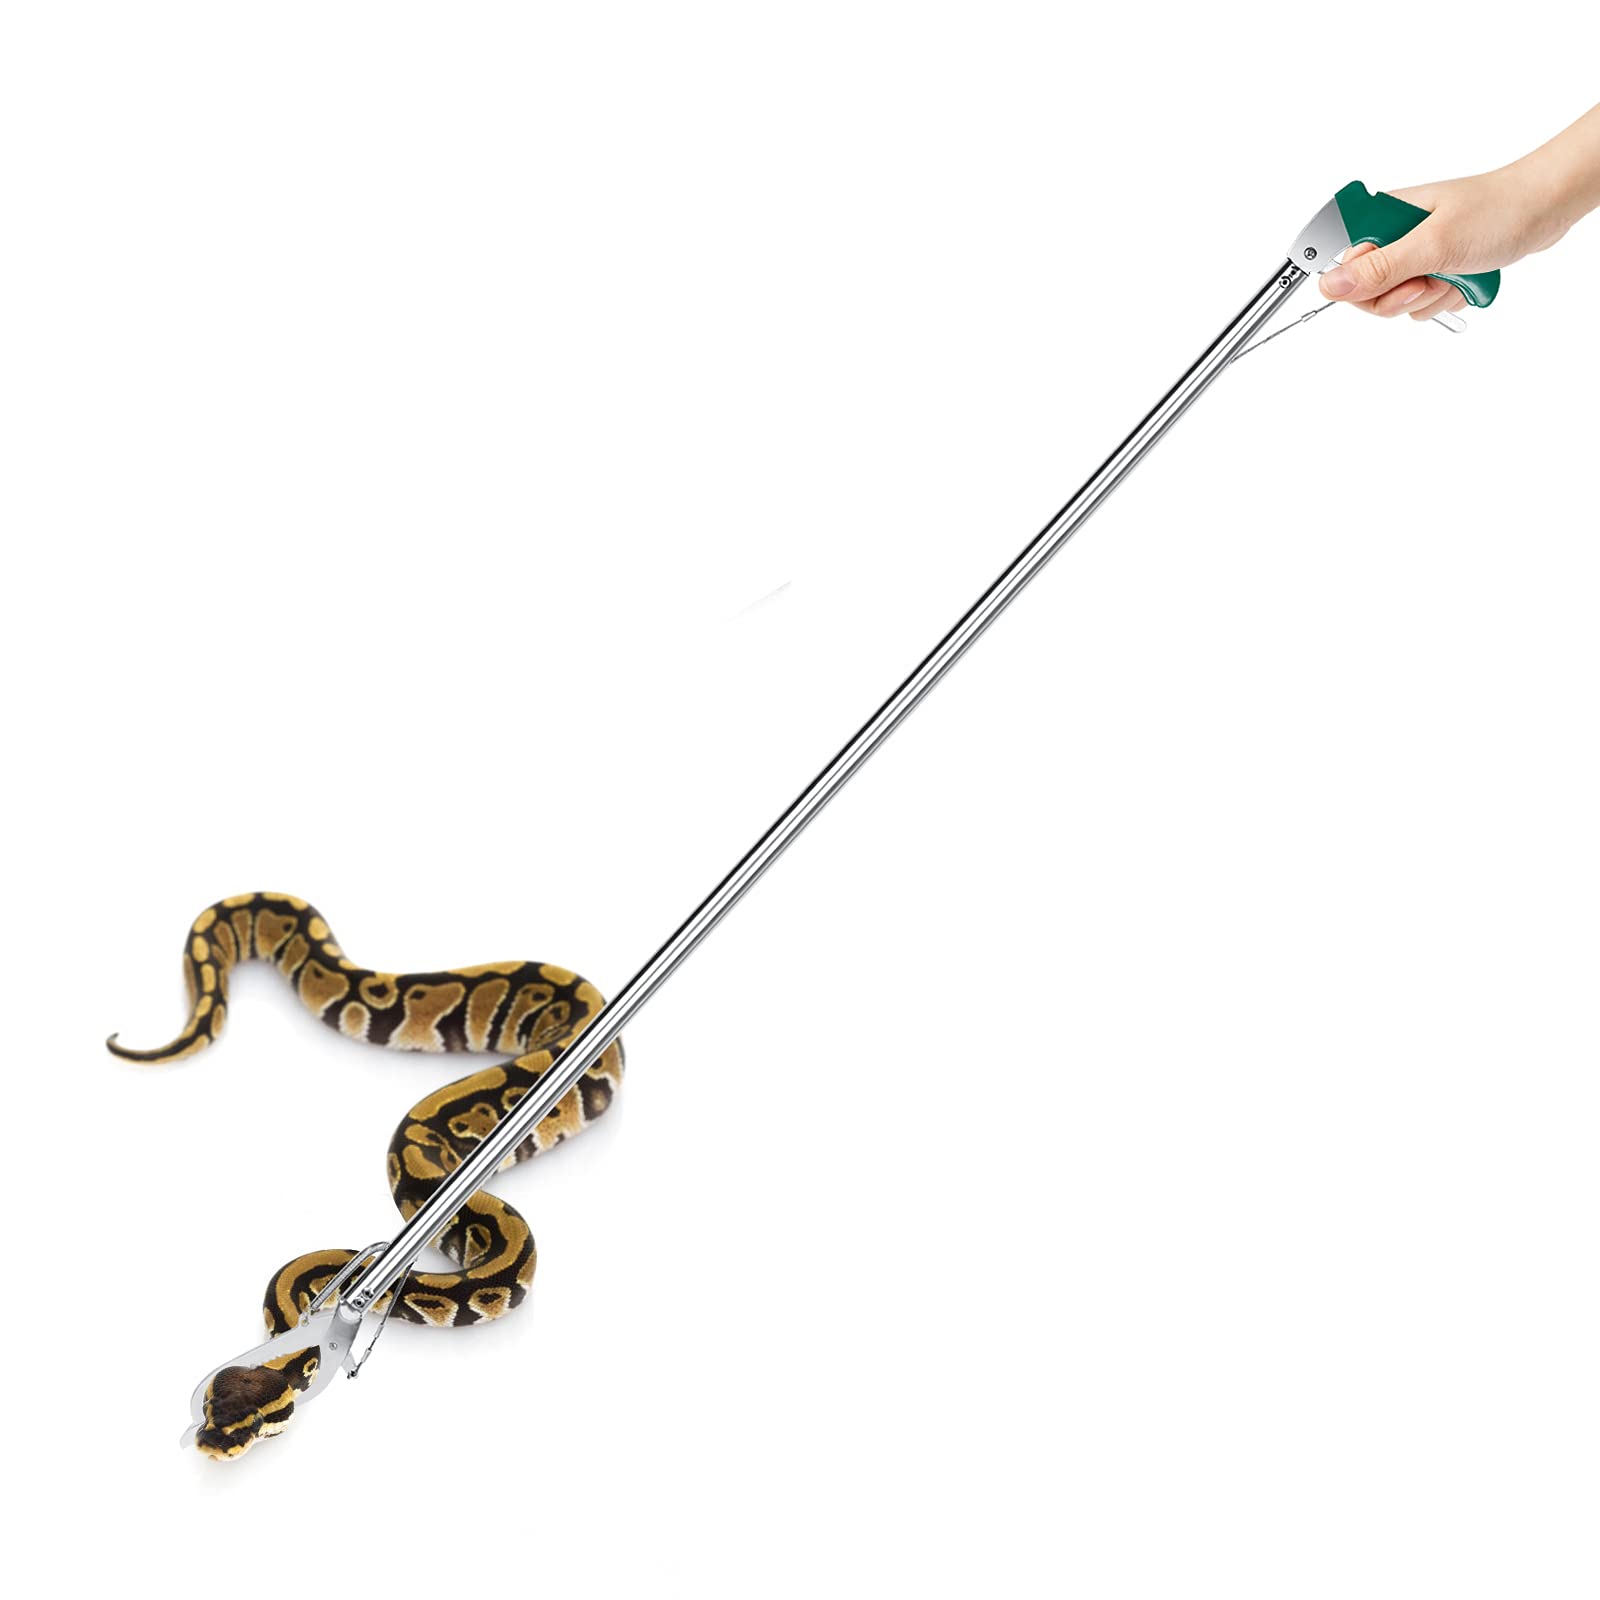 60“ Professional Snake Tongs - Extra Long Heavy Duty Snake Catcher Tongs Grabber Rattle Wide Jaw Handling Tool